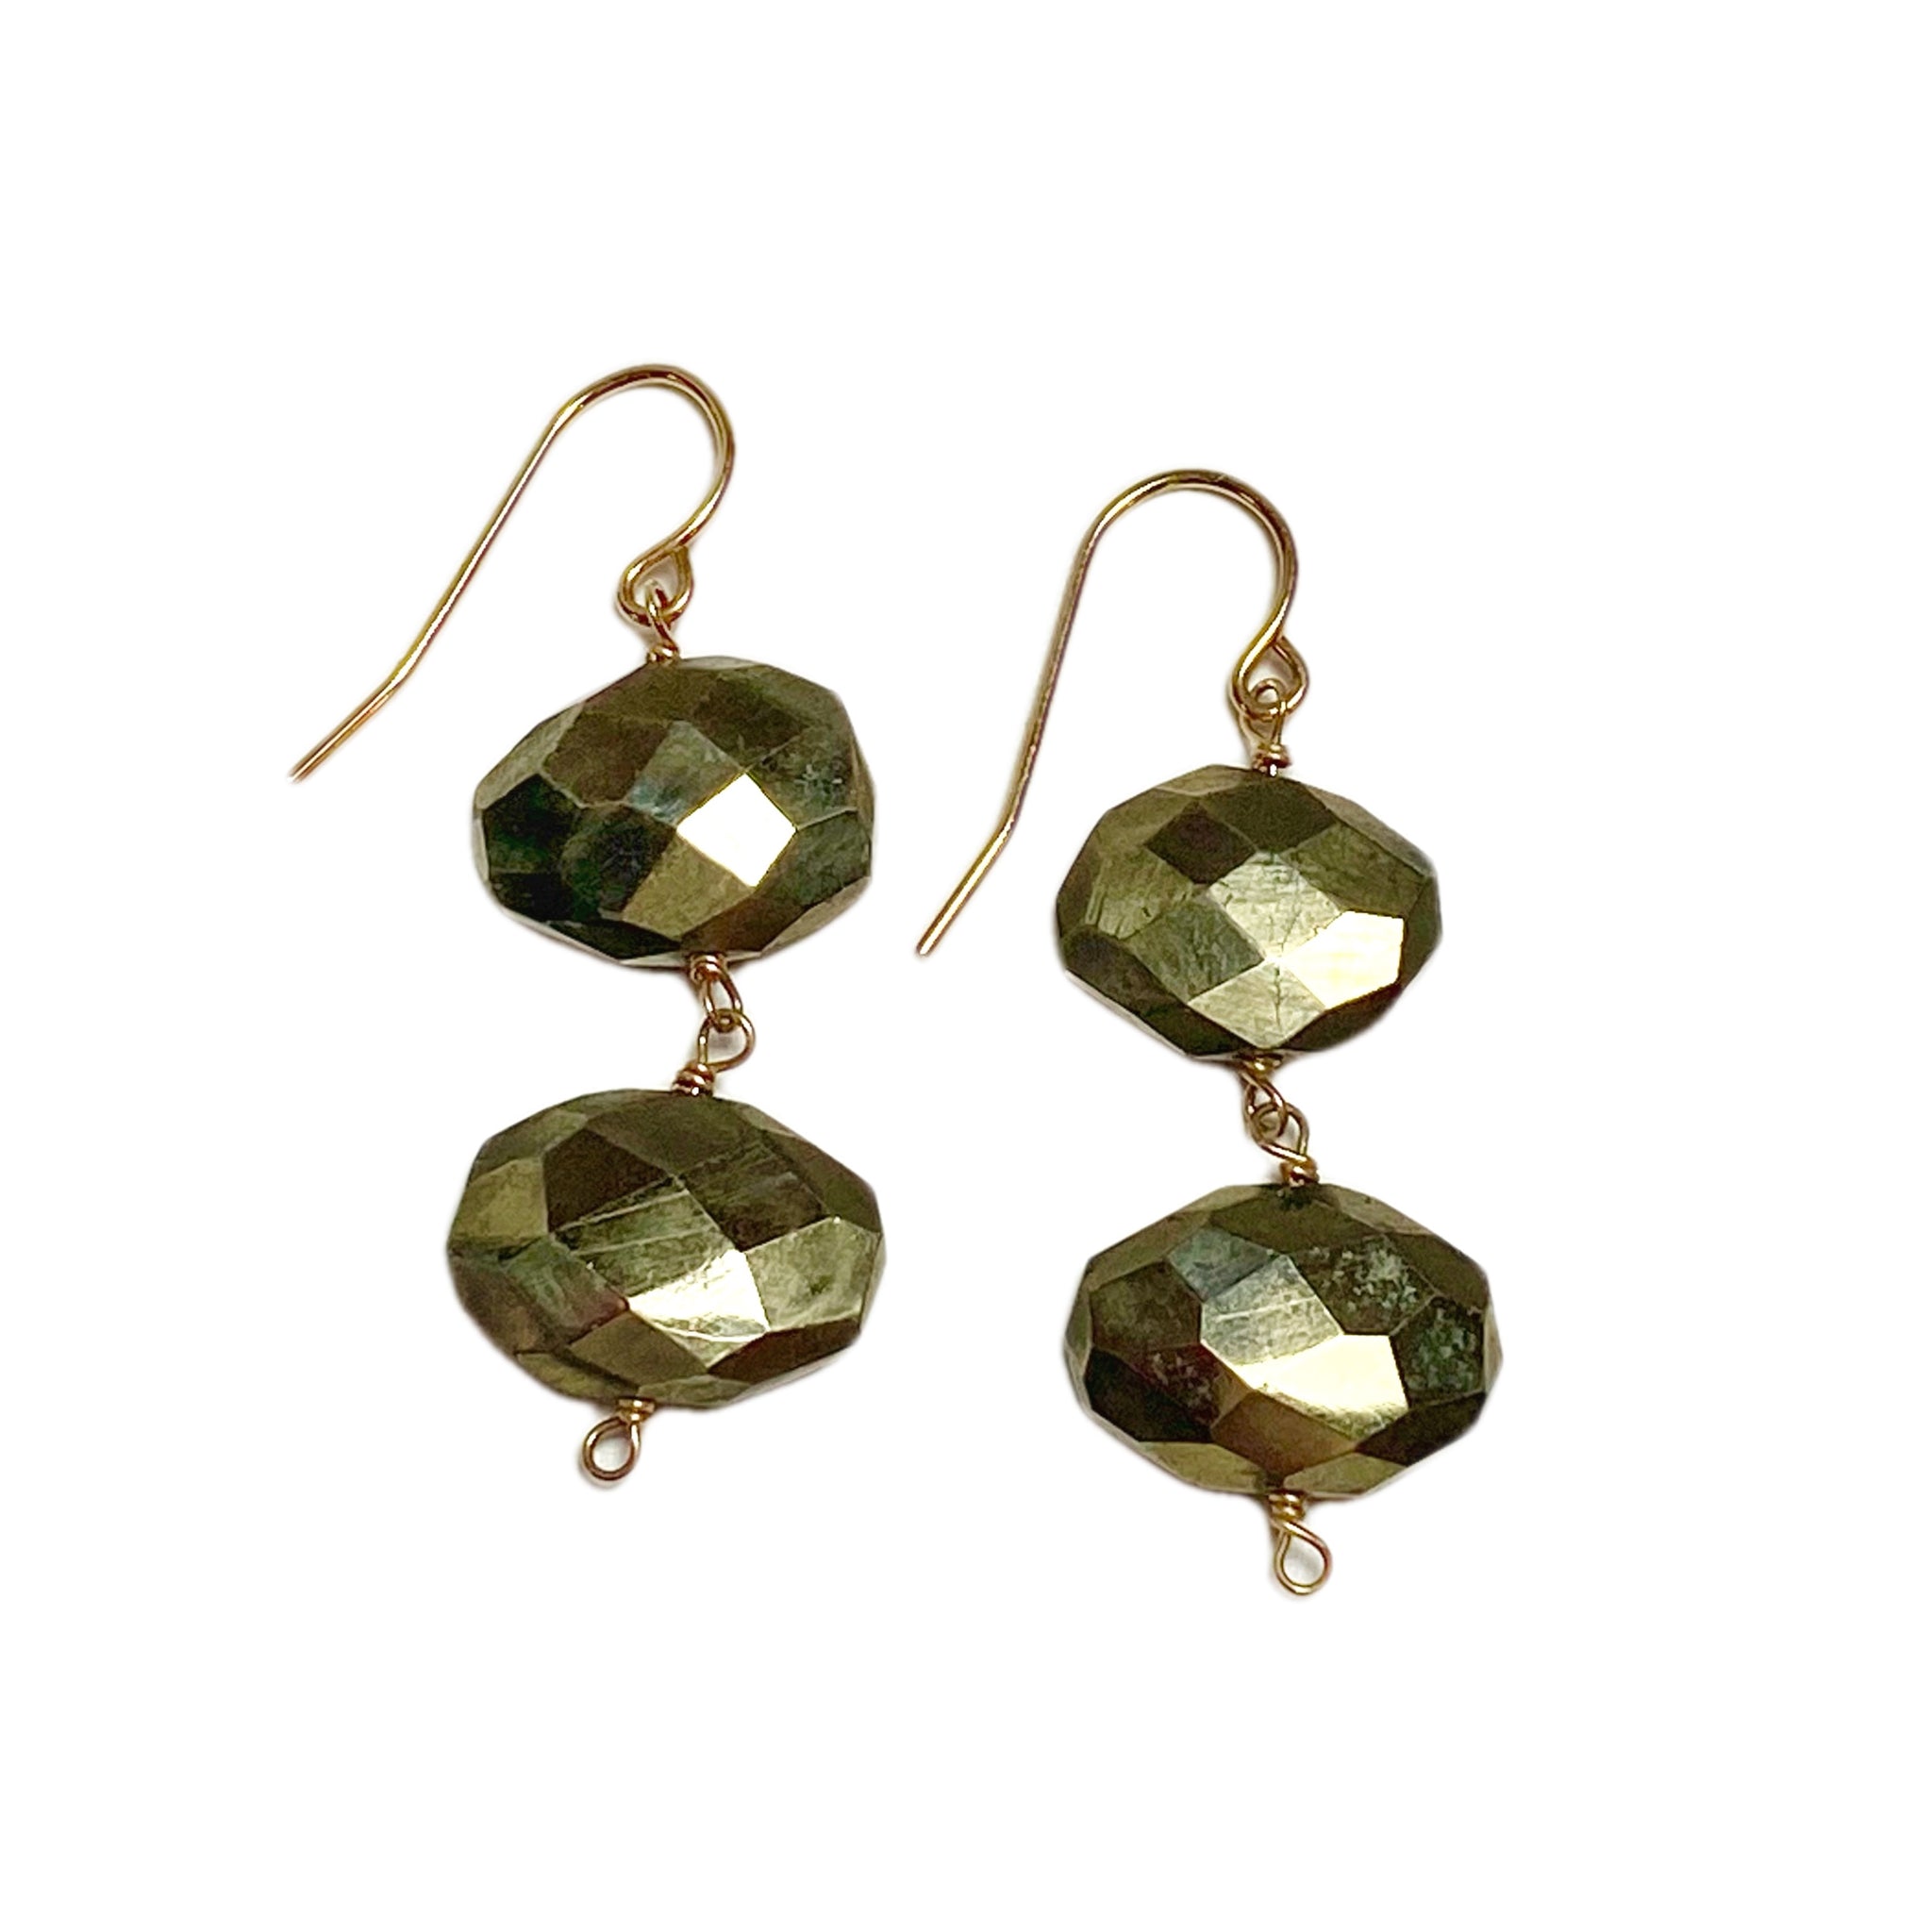 Mickey Lynn faceted double drop earrings Available at Shaylula Jewlery & Gifts in Tarrytown, NY